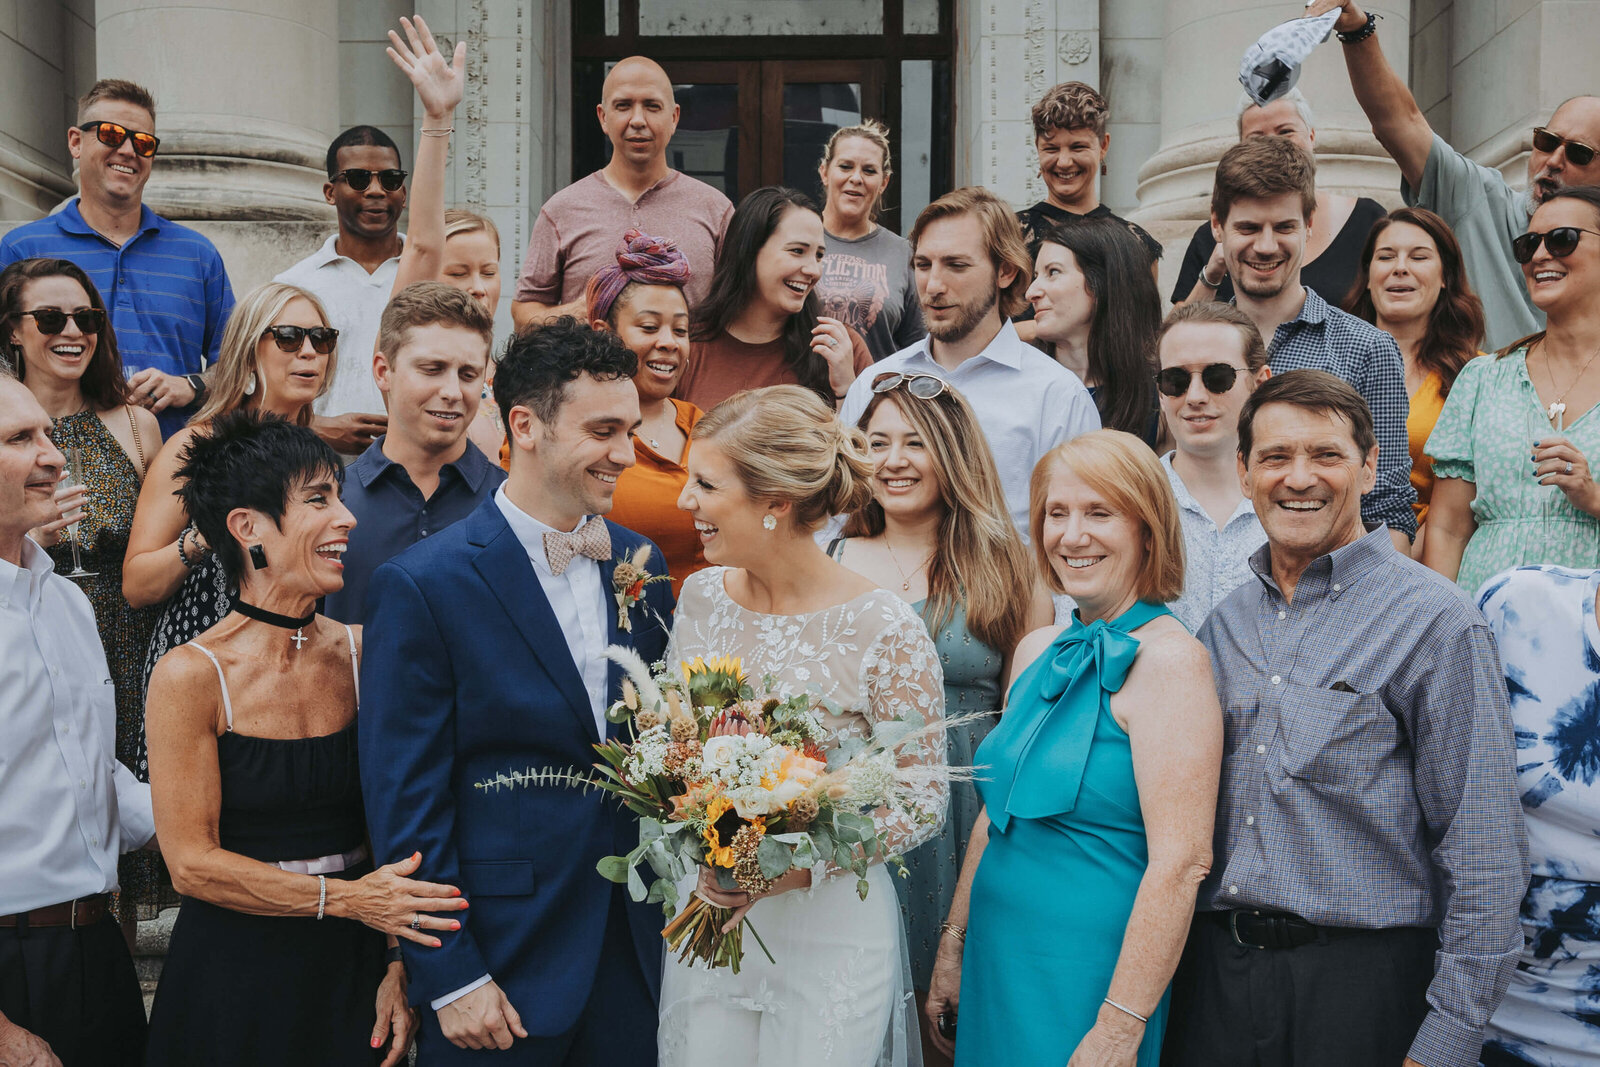 Laughter in a group photo after an intimate wedding